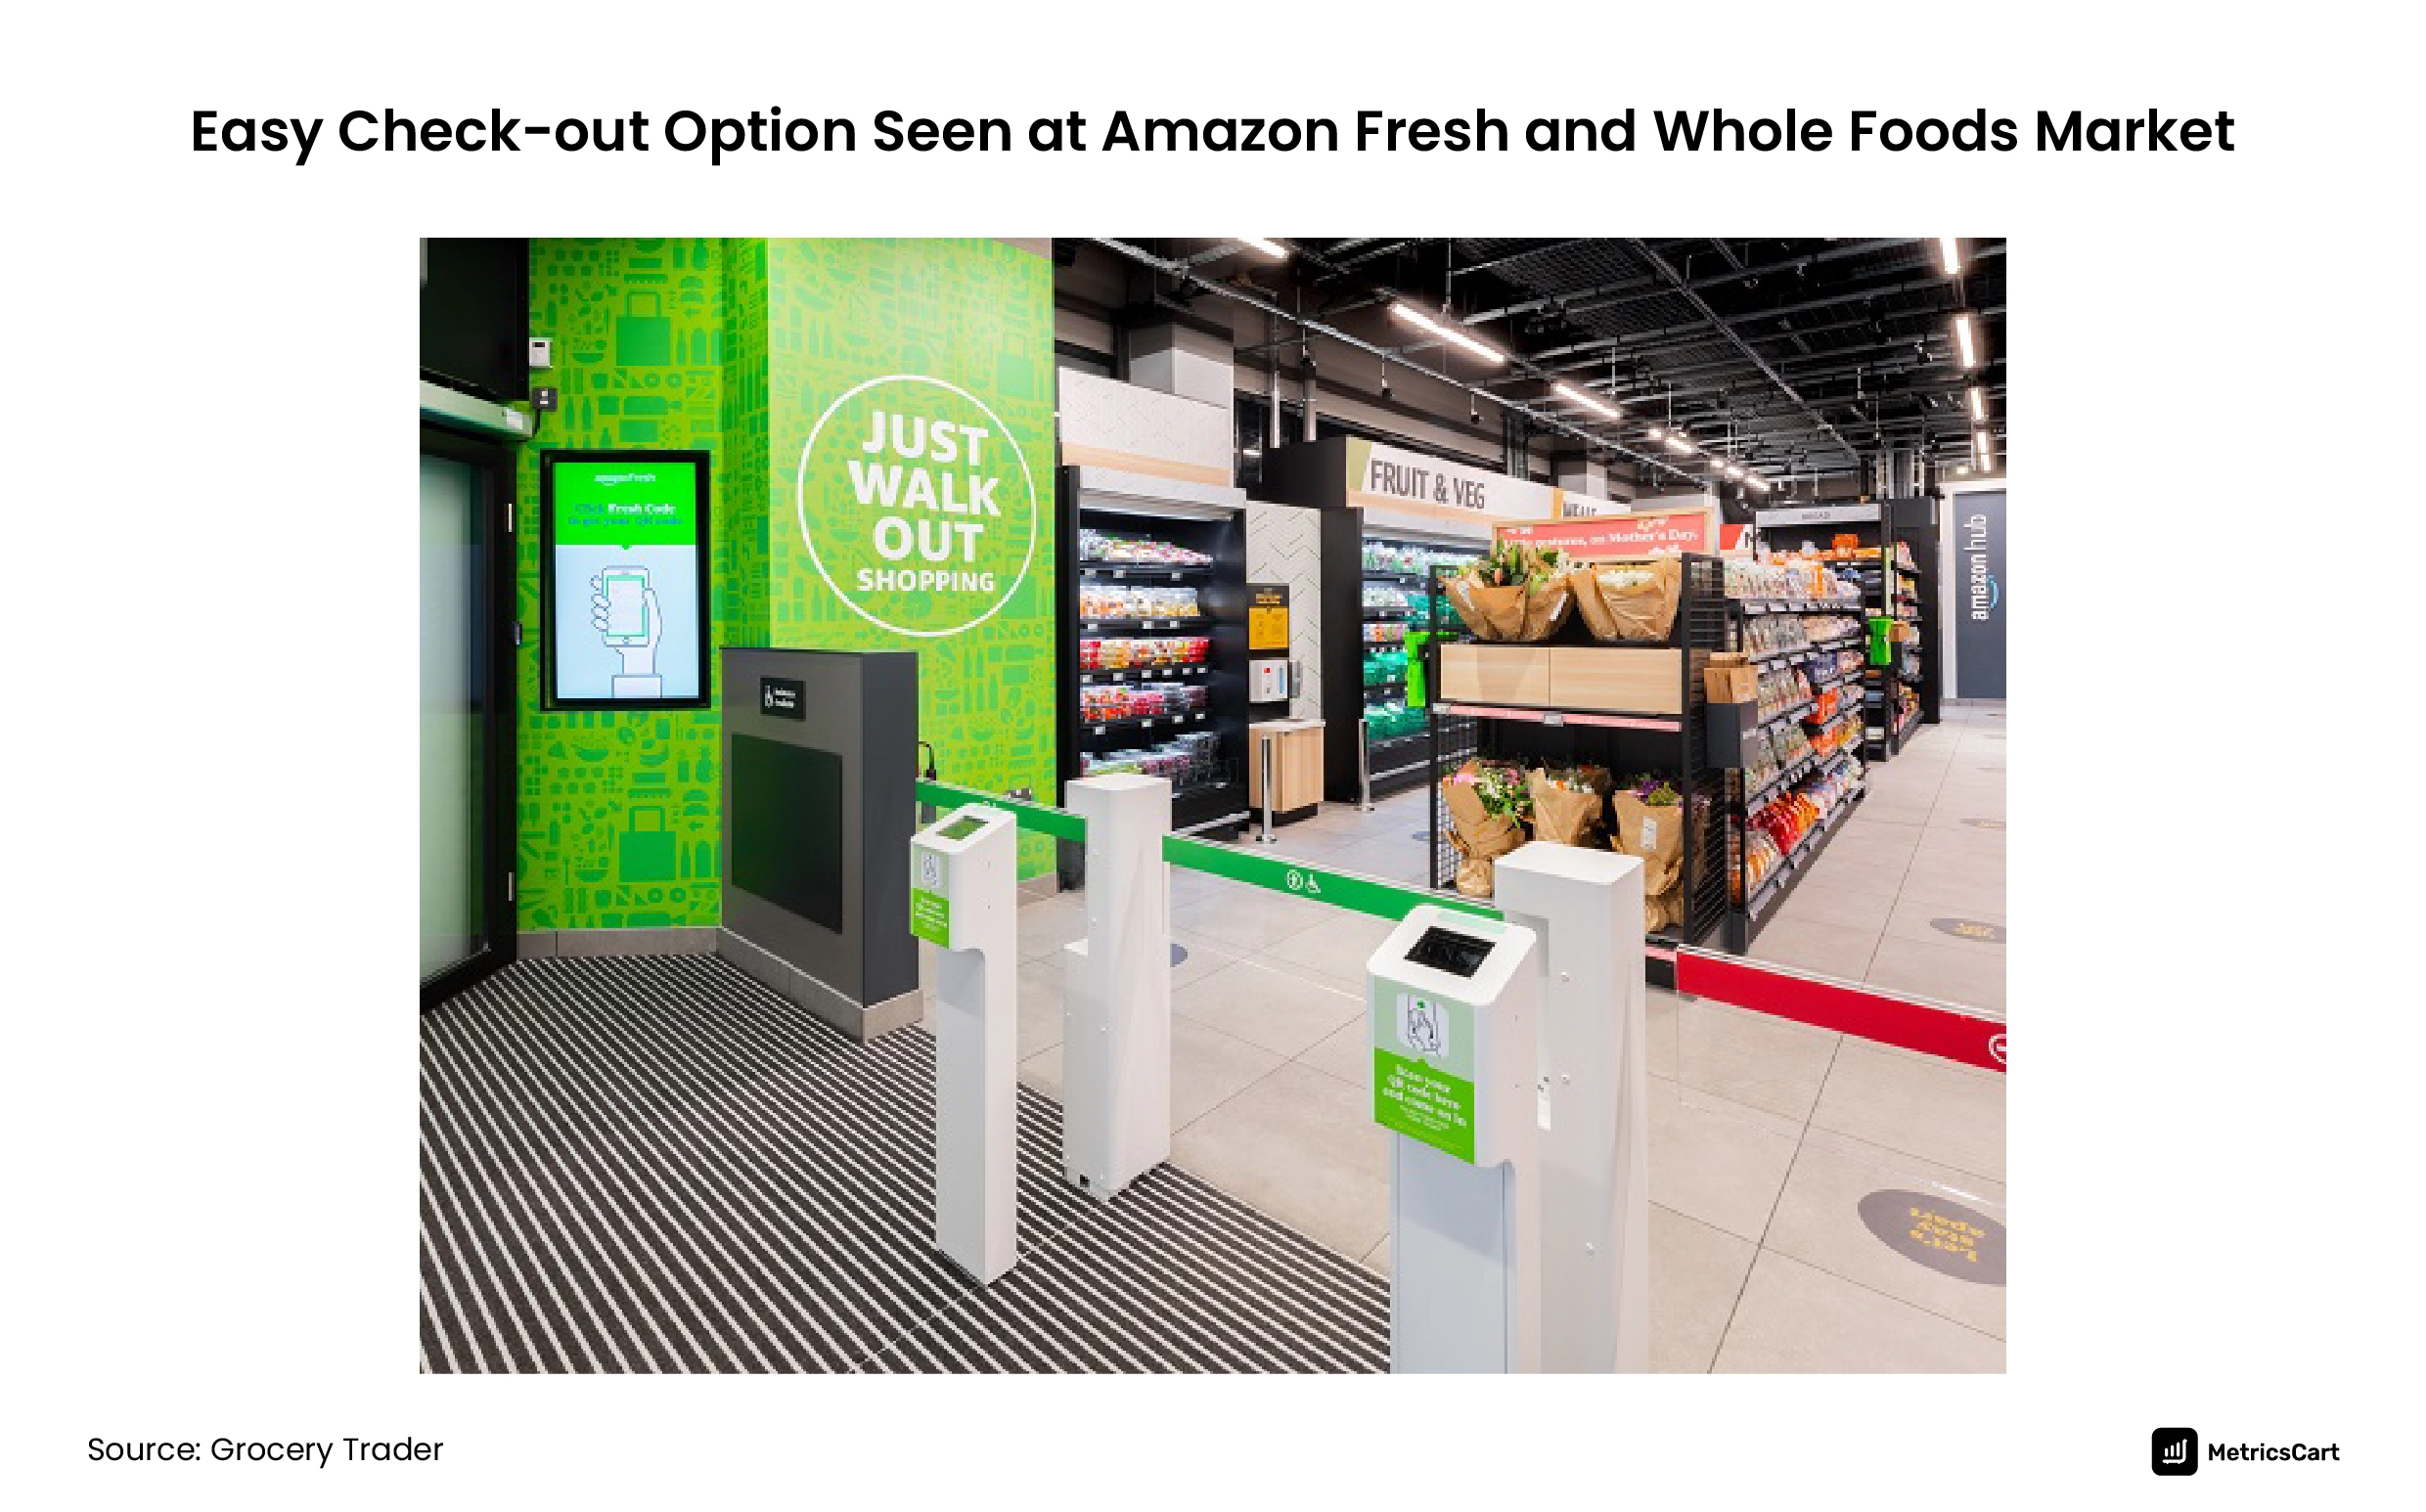 Just Walk Out option at Amazon and Whole Foods